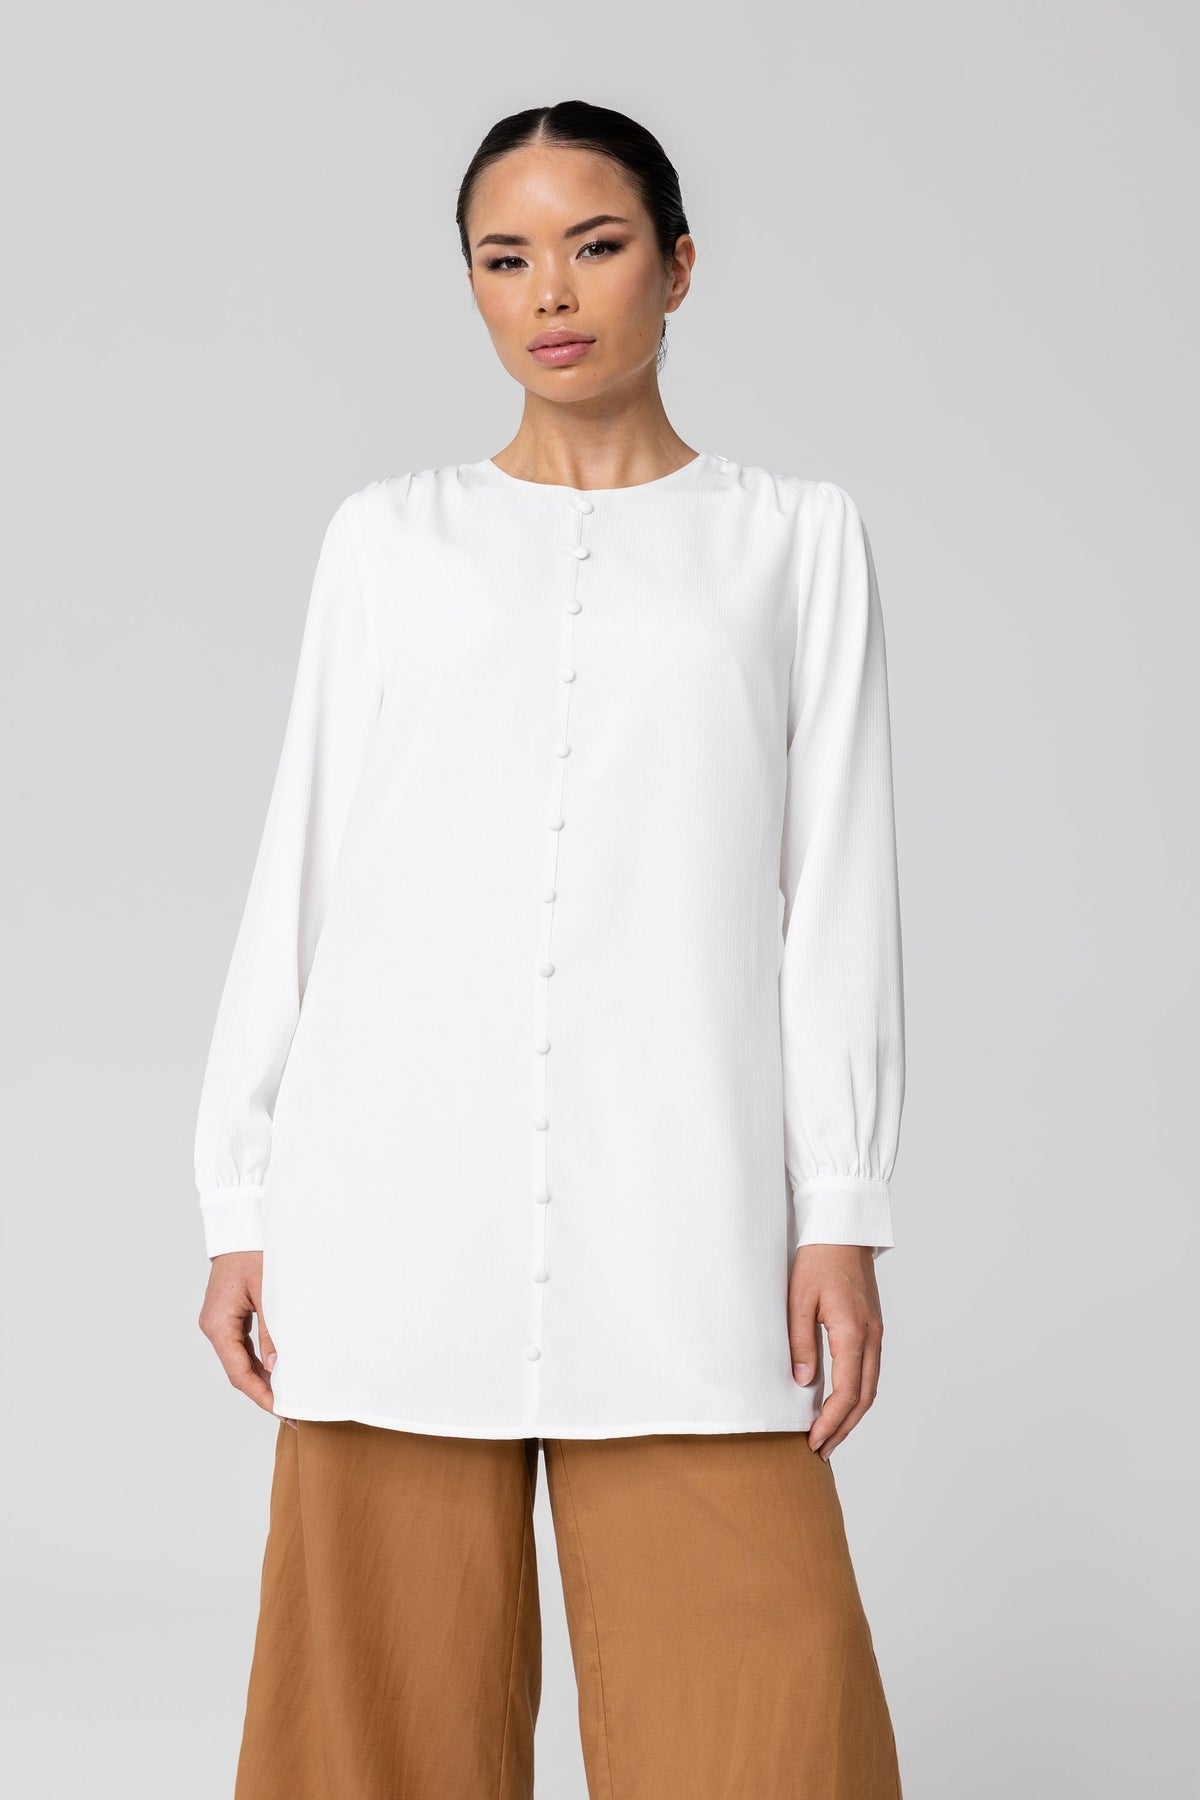 Yuna White Button Front Top Veiled Collection 